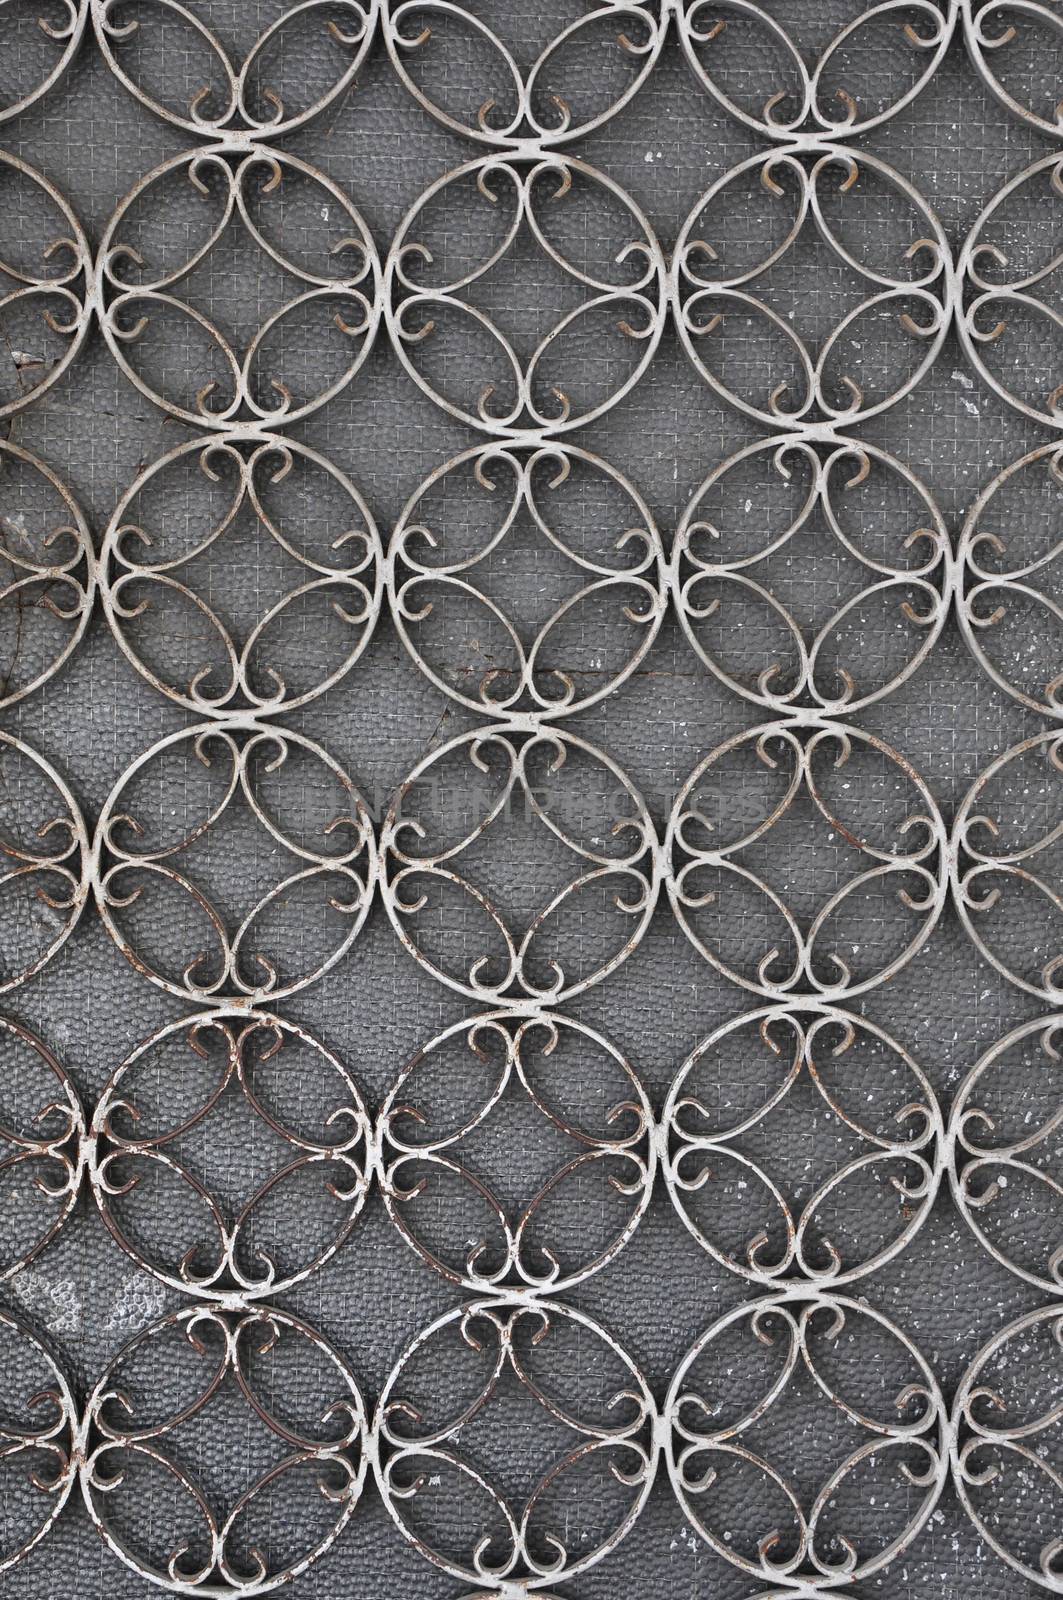 Vintage iron door frame with circles pattern detail and stained glass background.